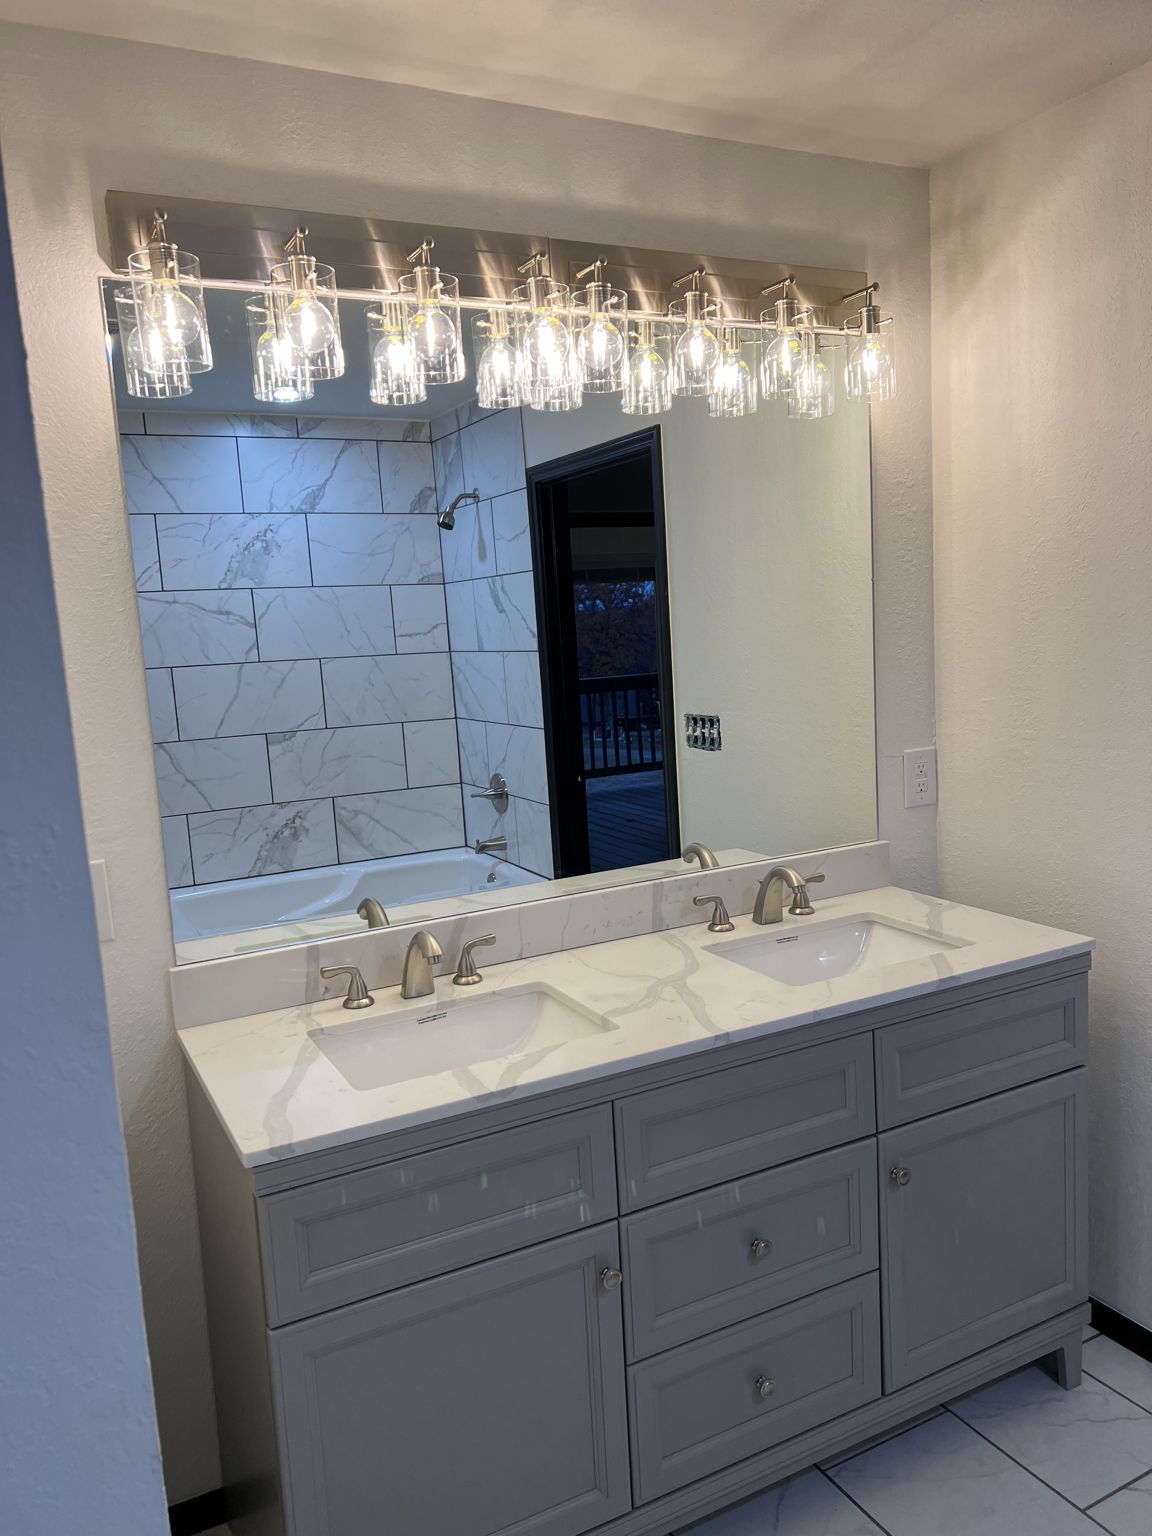 Elegant lighting and double sinks in master bath